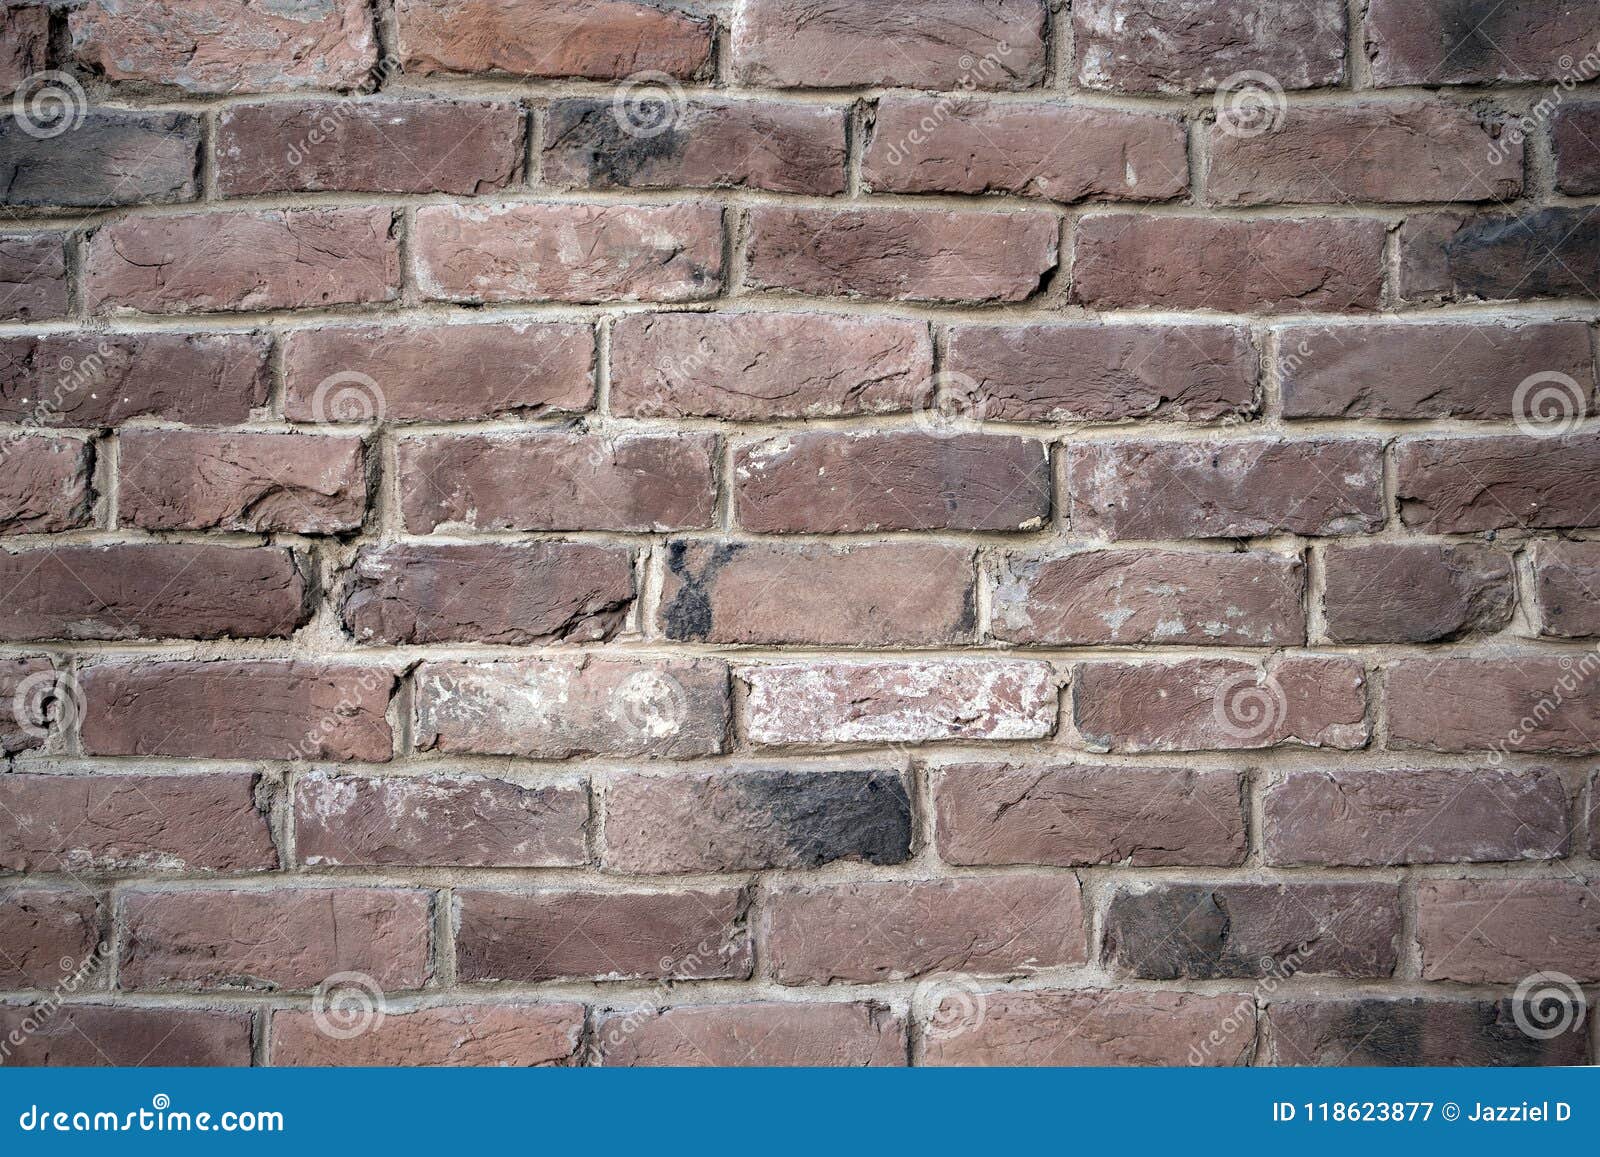 old colorful resaturated brick wall texture